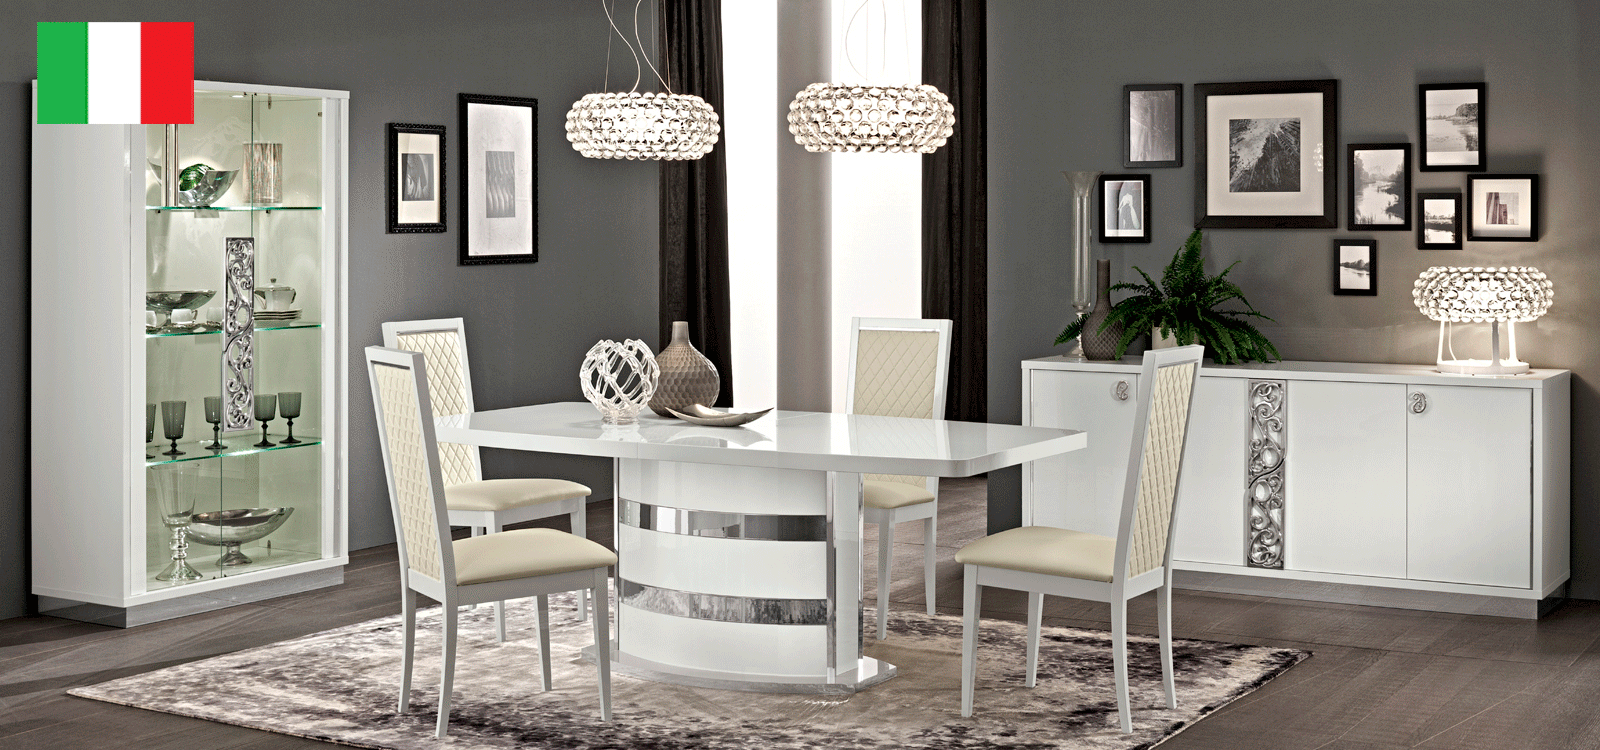 Dining Room Furniture Chairs Roma Dining White, Italy